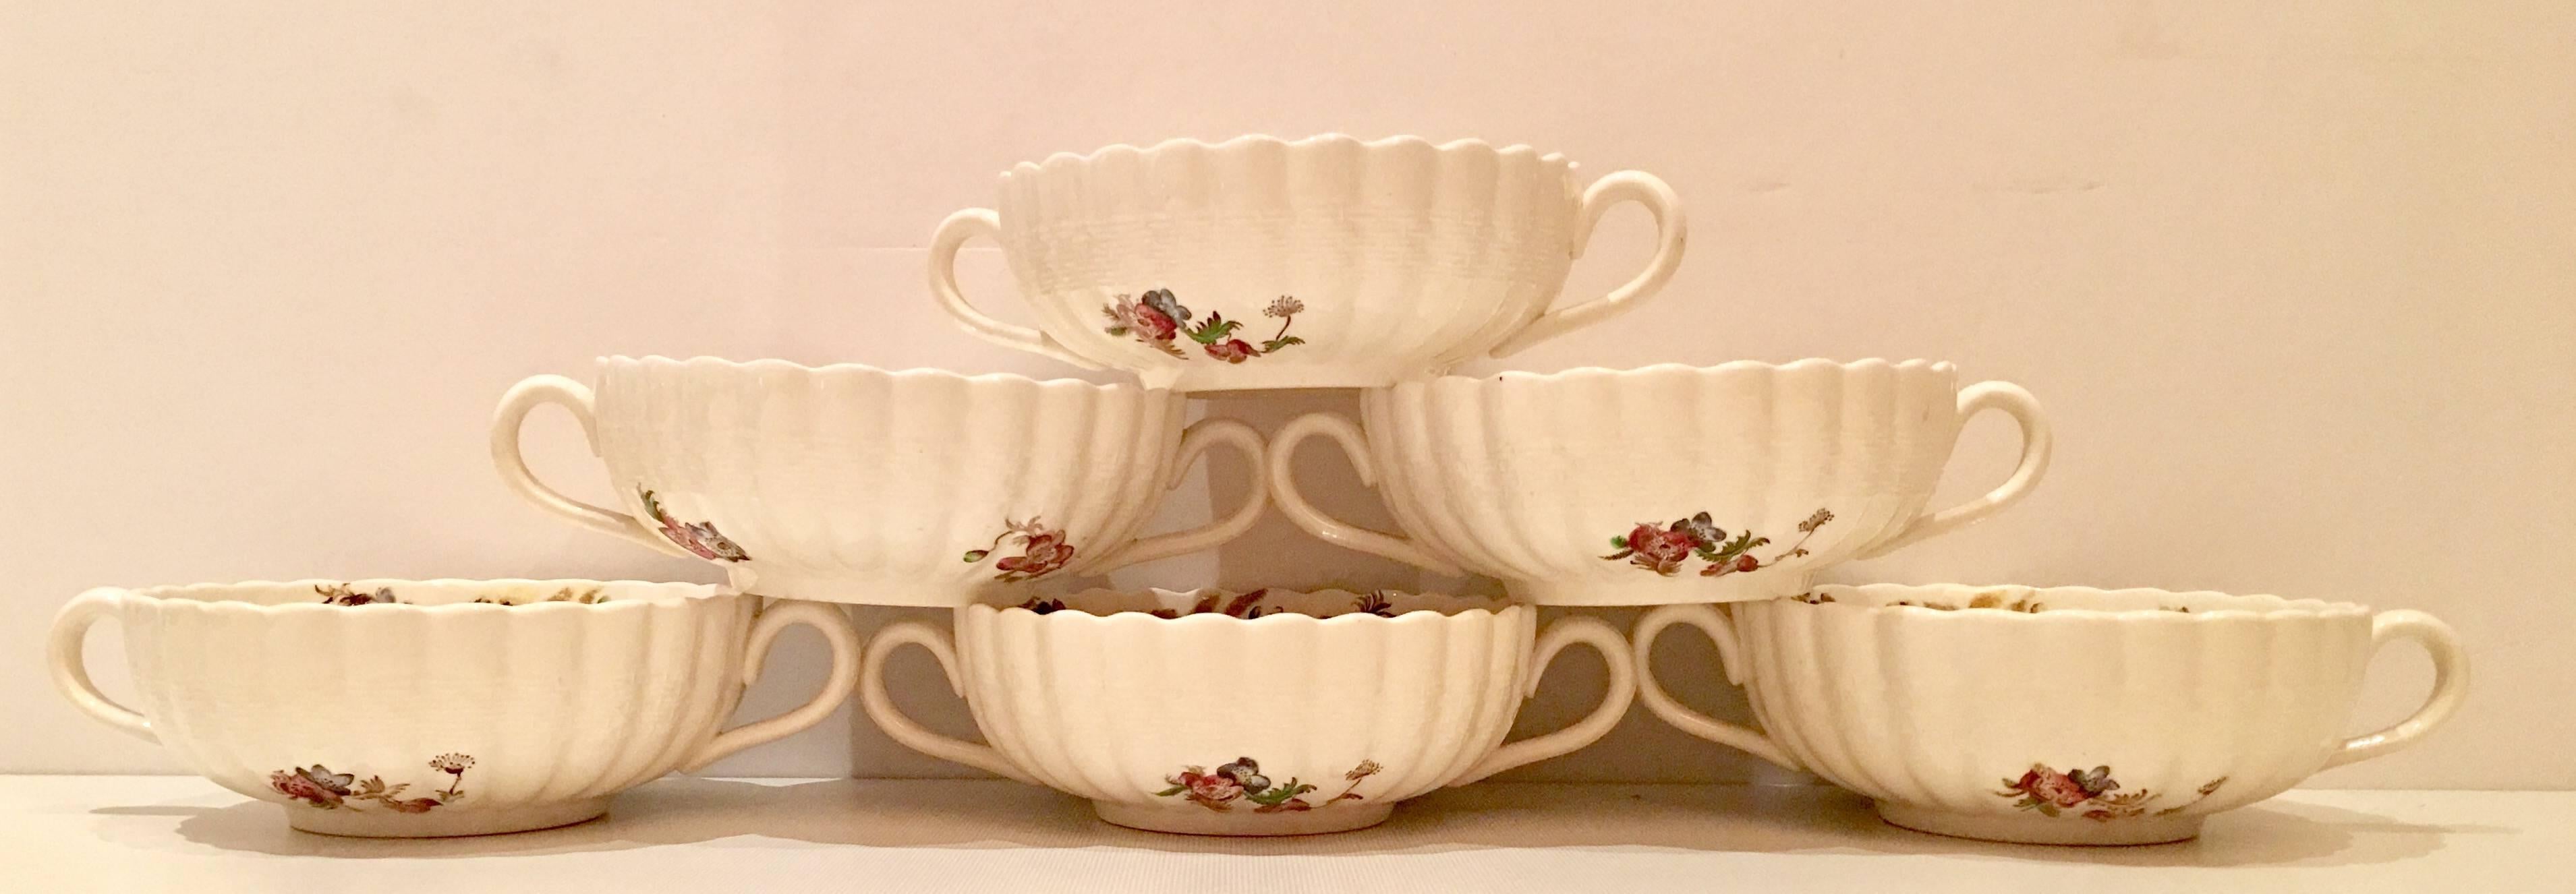 Set of six signed Copeland Spode "Wicker Lane" pattern cream soup bowls. Features and off-white ground with a floral bouquet motif with basket weave detail and scalloped edge. Each piece is signed on the underside.